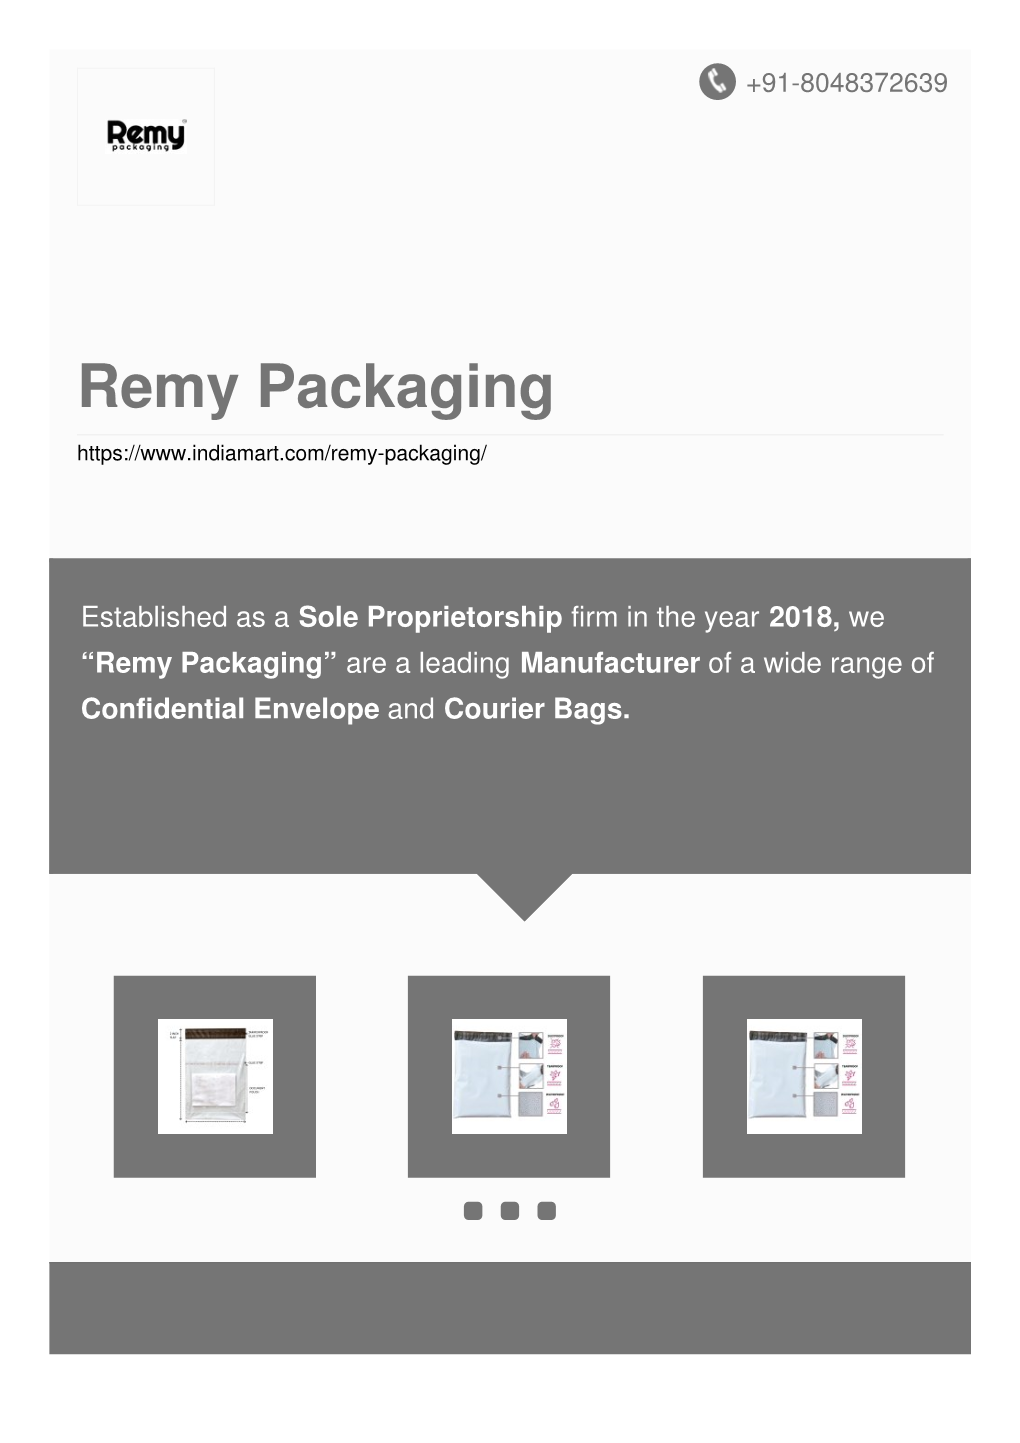 Remy Packaging